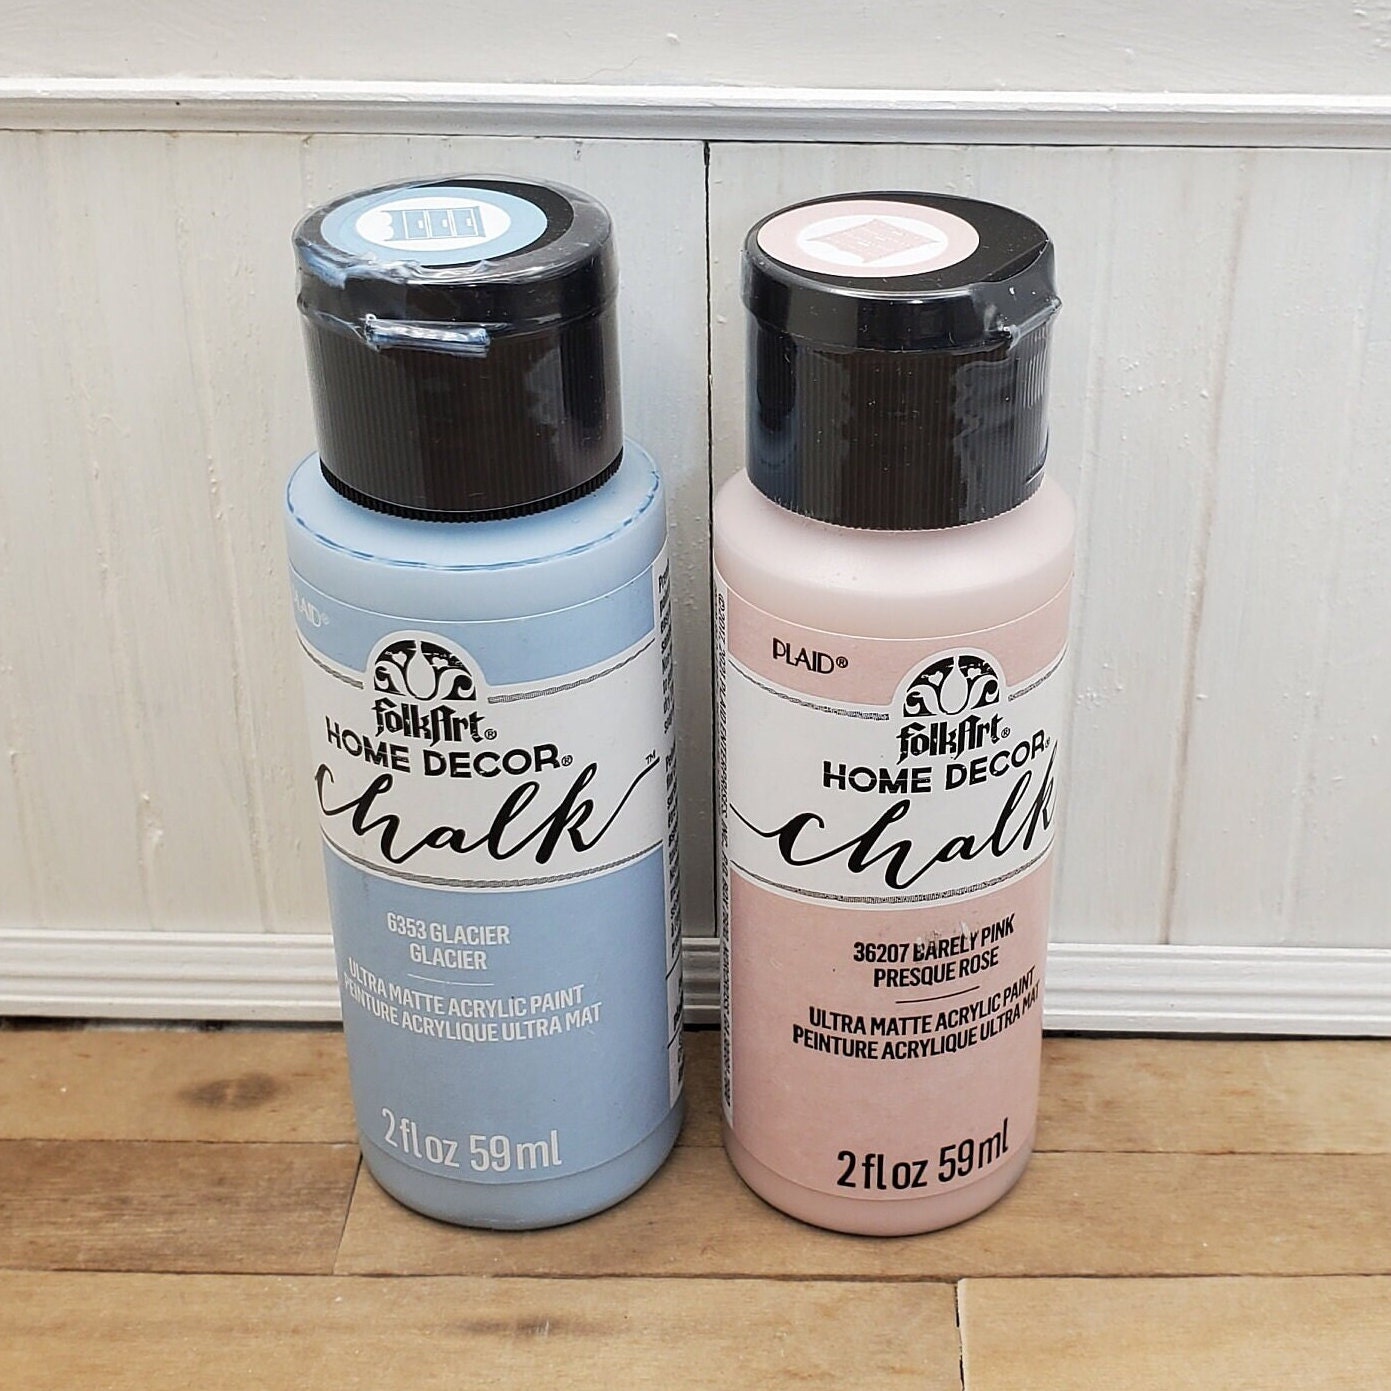 Folk Art Home Decor Chalk Paint, Chalk Paint in a 2 Ounce Try-it Bottle,  Great for Small Projects. Even a Beginner Can Get Great Results 